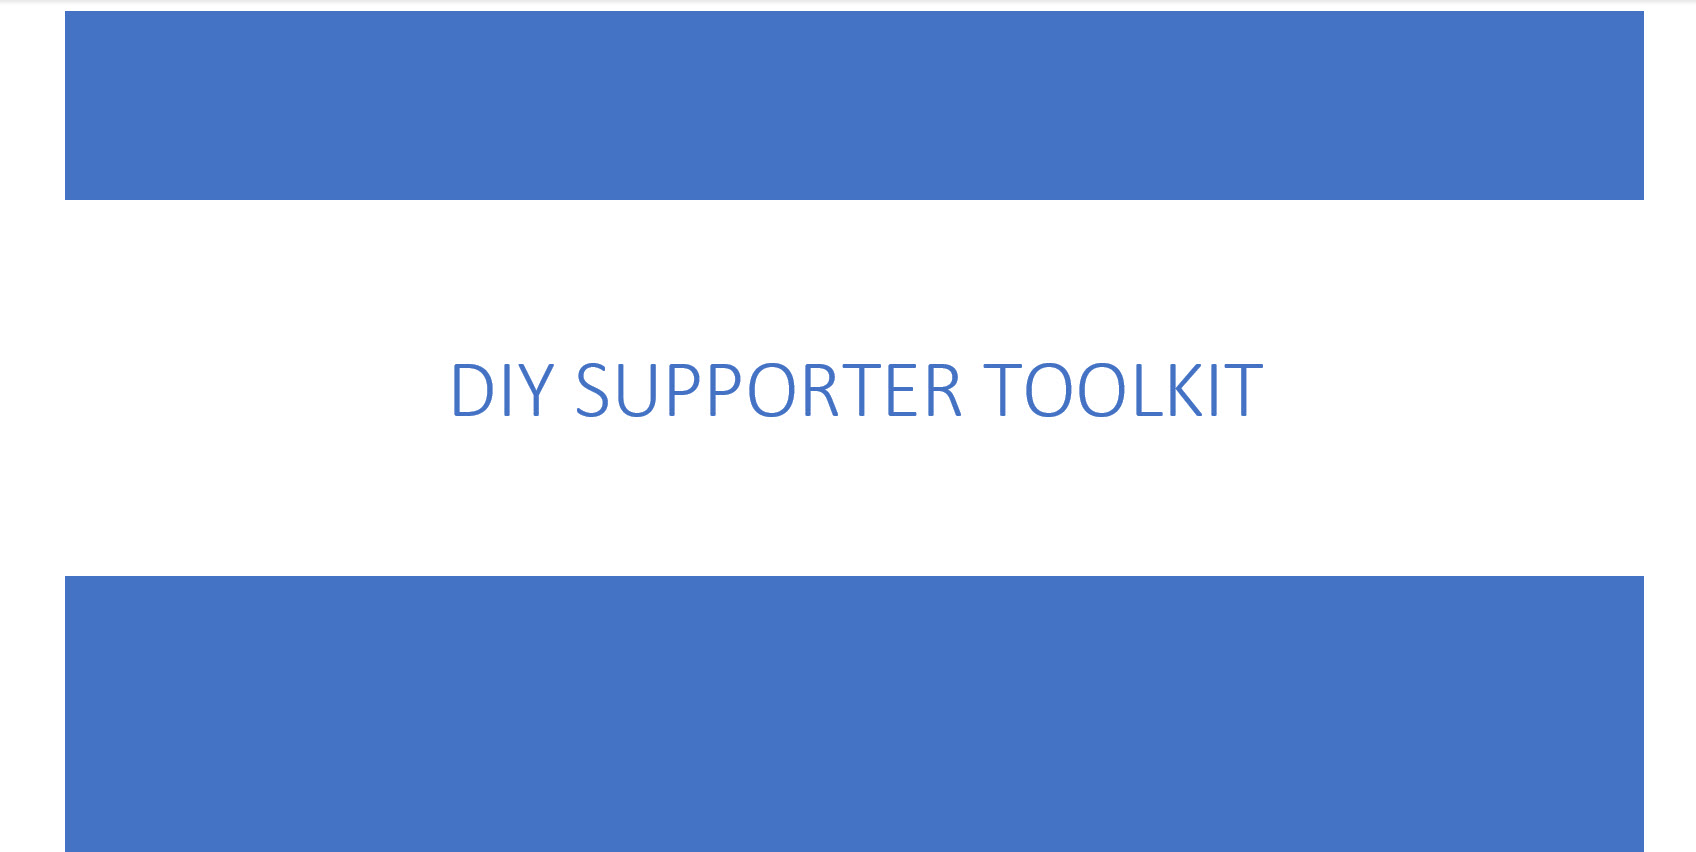 Just Published: Fundraiser Toolkit to help organizations promote DIY fundraising 6935